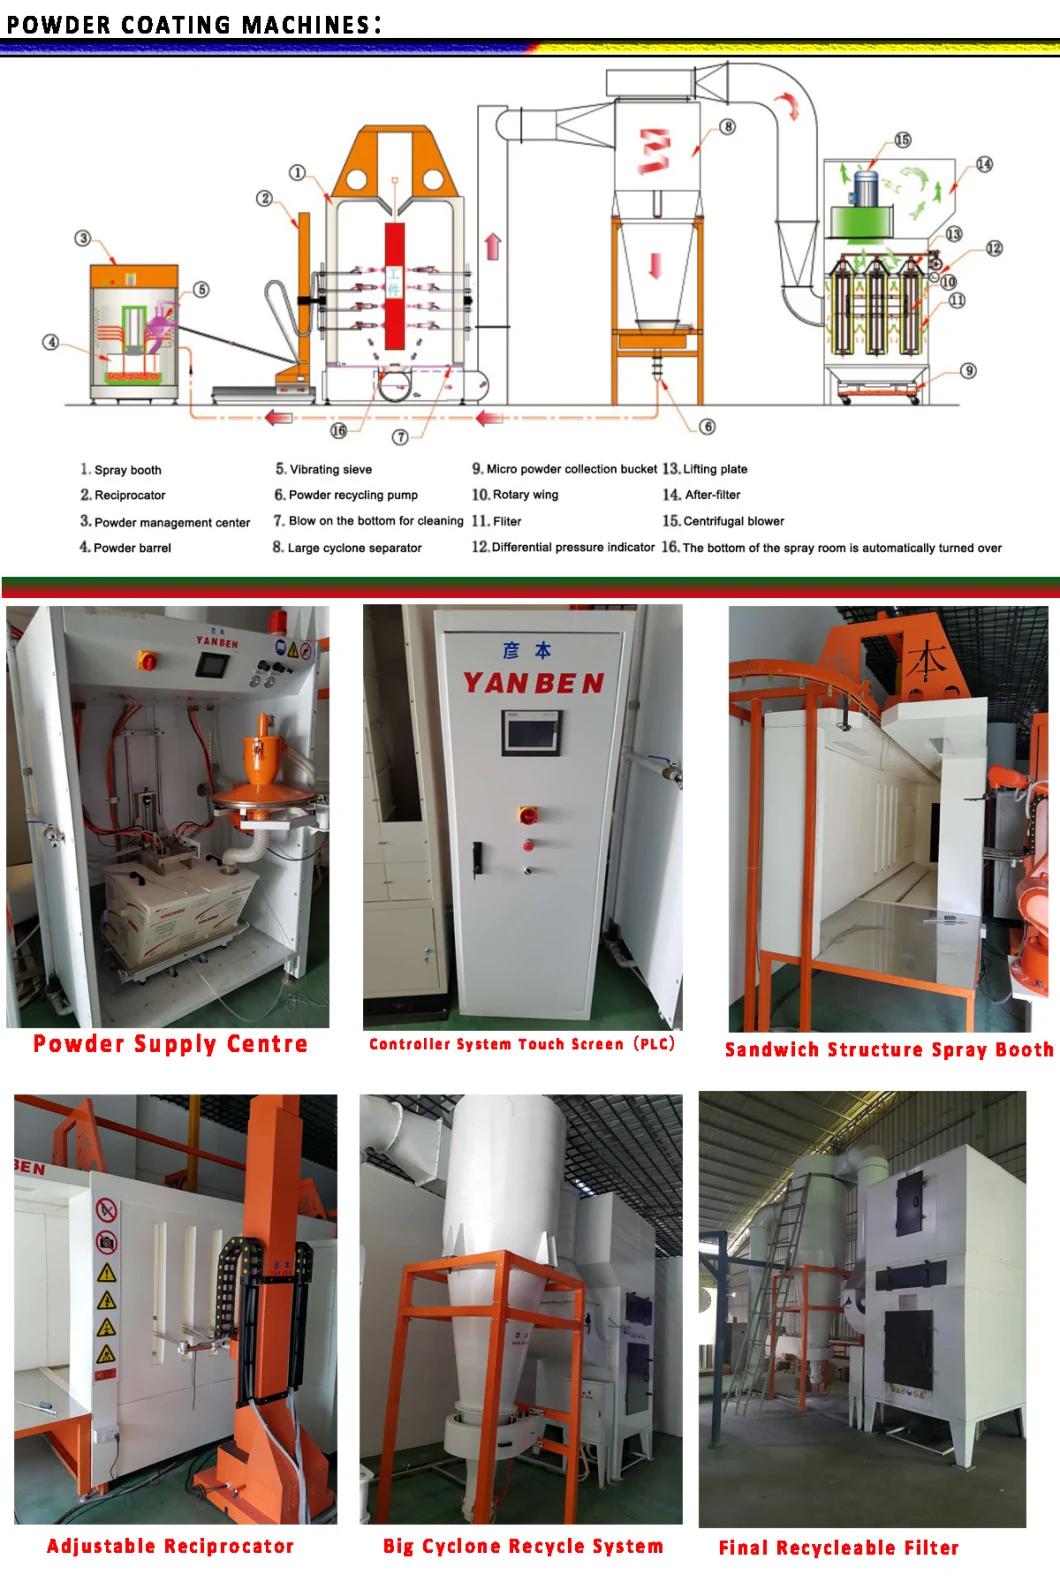 Small Batch Grinding Machine for Powder Coating Manufacturing